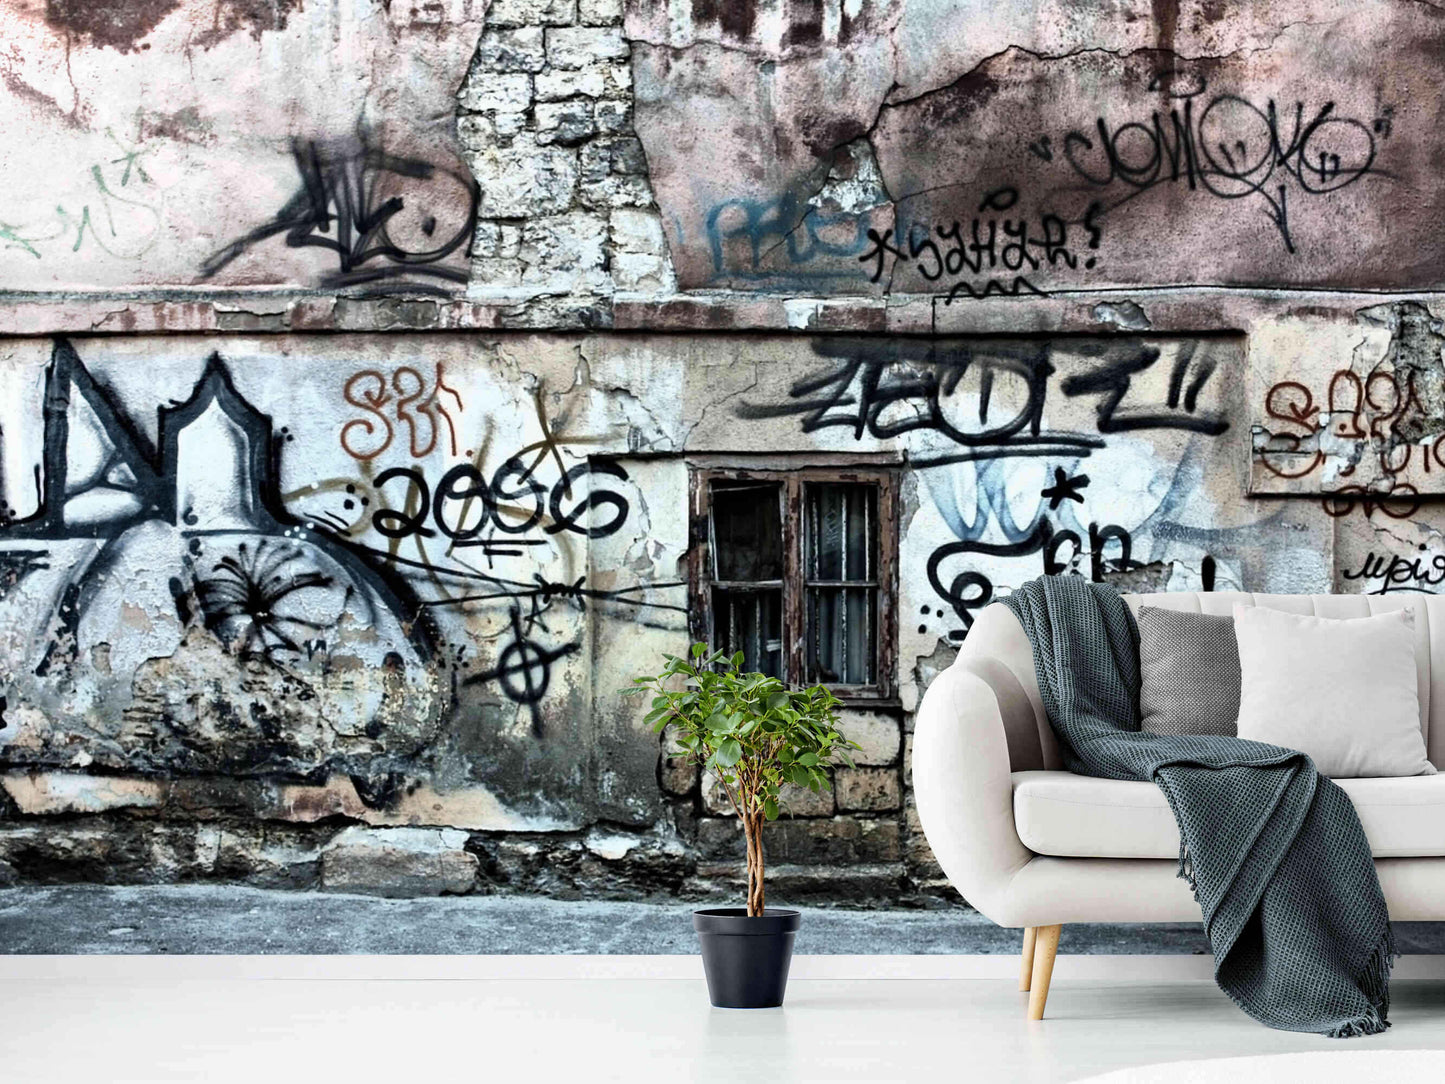 Textured Graffiti Wallpaper" featuring realistic urban wall art for a bold room makeover.